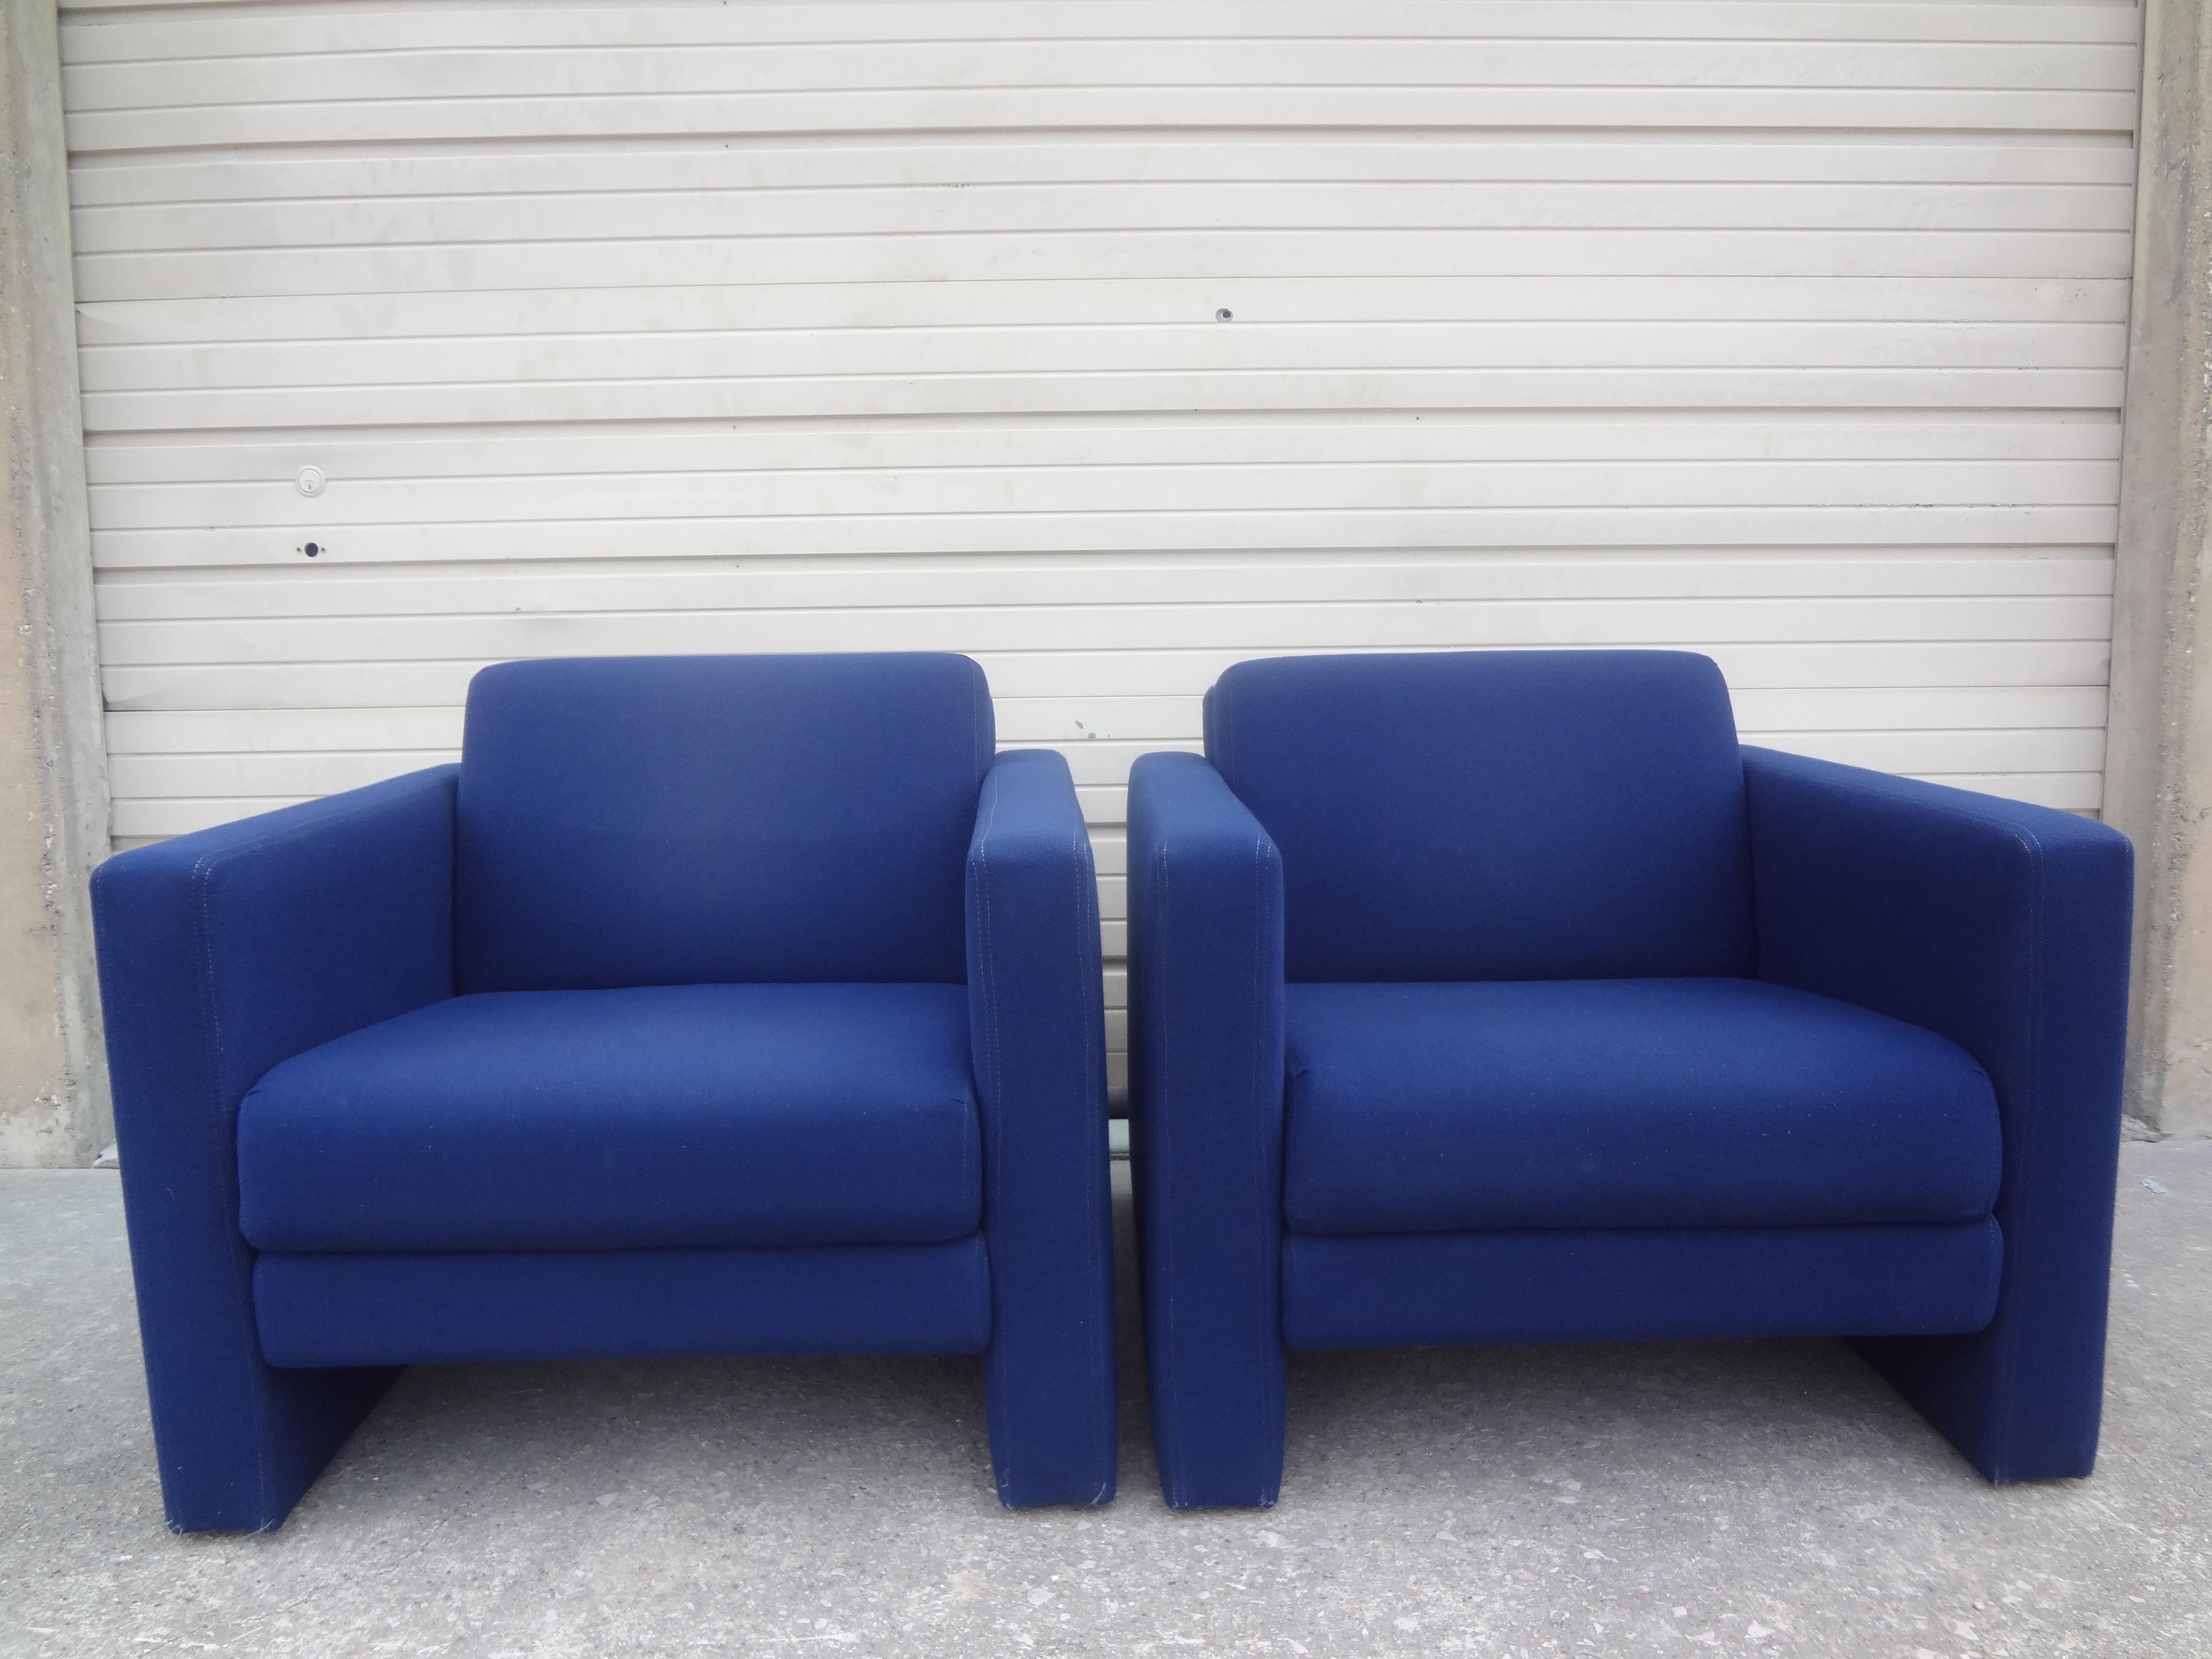 Pair of Vintage Milo Baughman Style Club Chairs 1